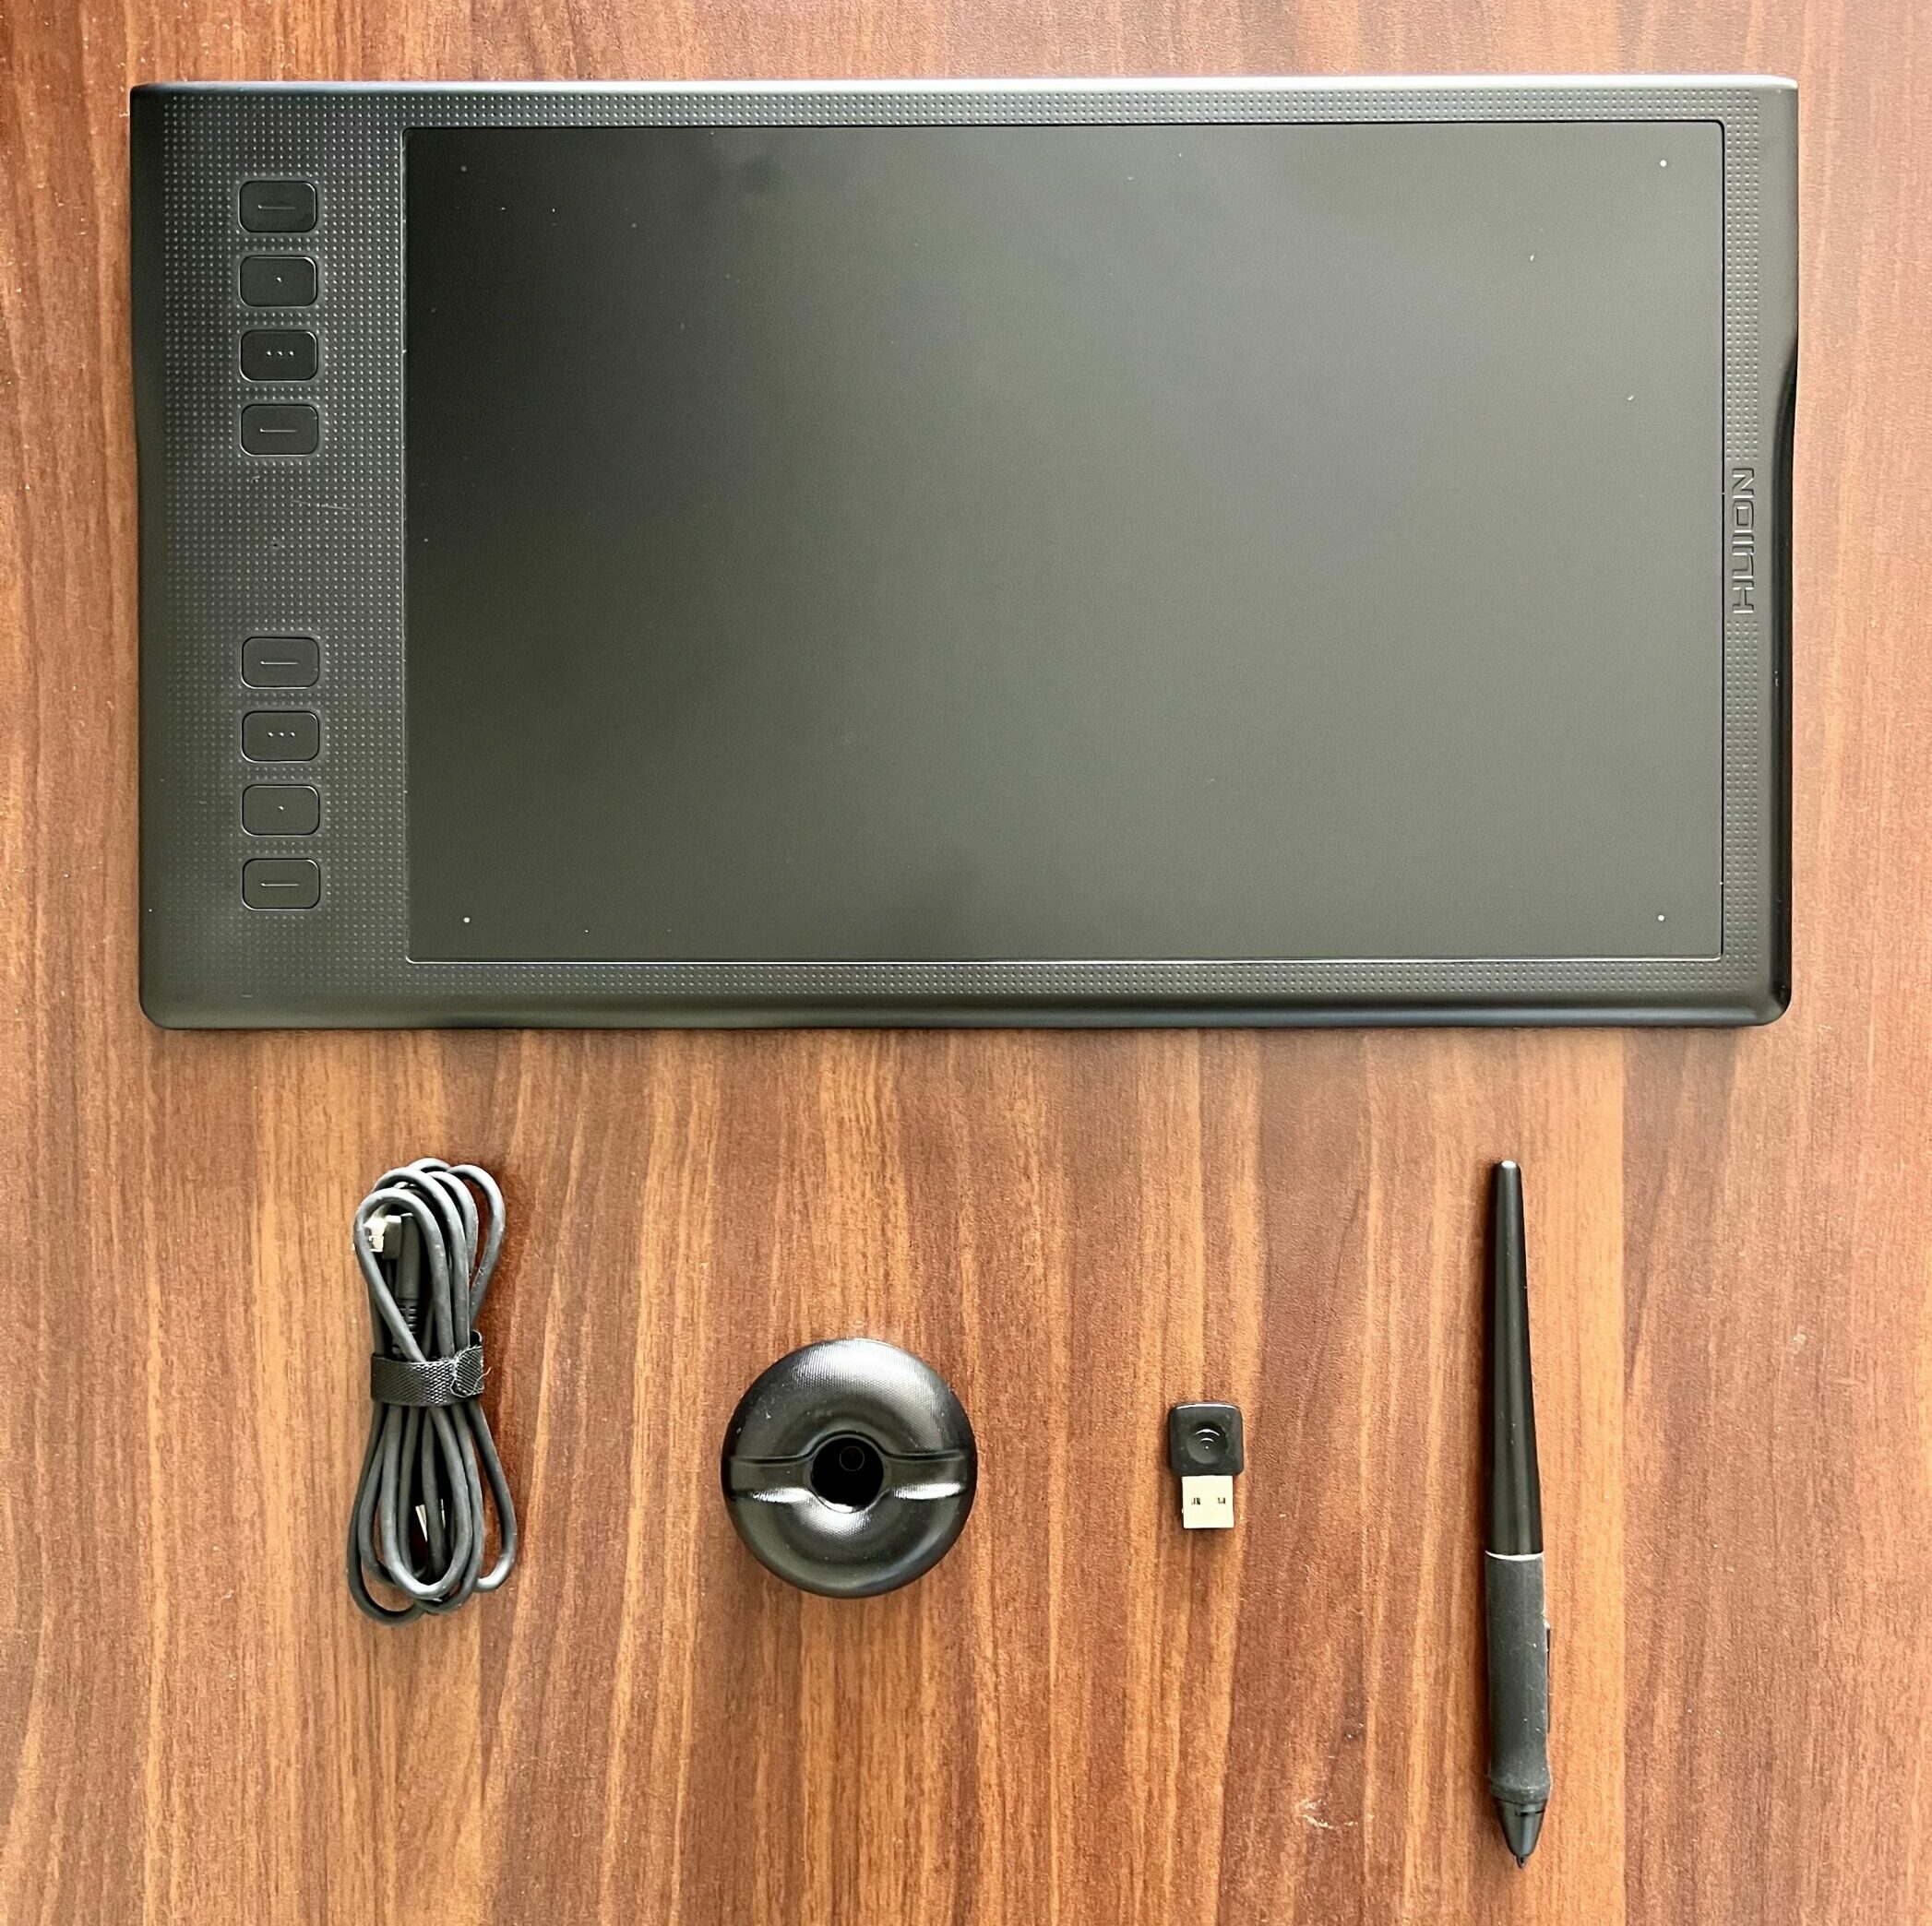 The Huion Wireless Graphics Tablet - Huion Inspiroy Q11K V2